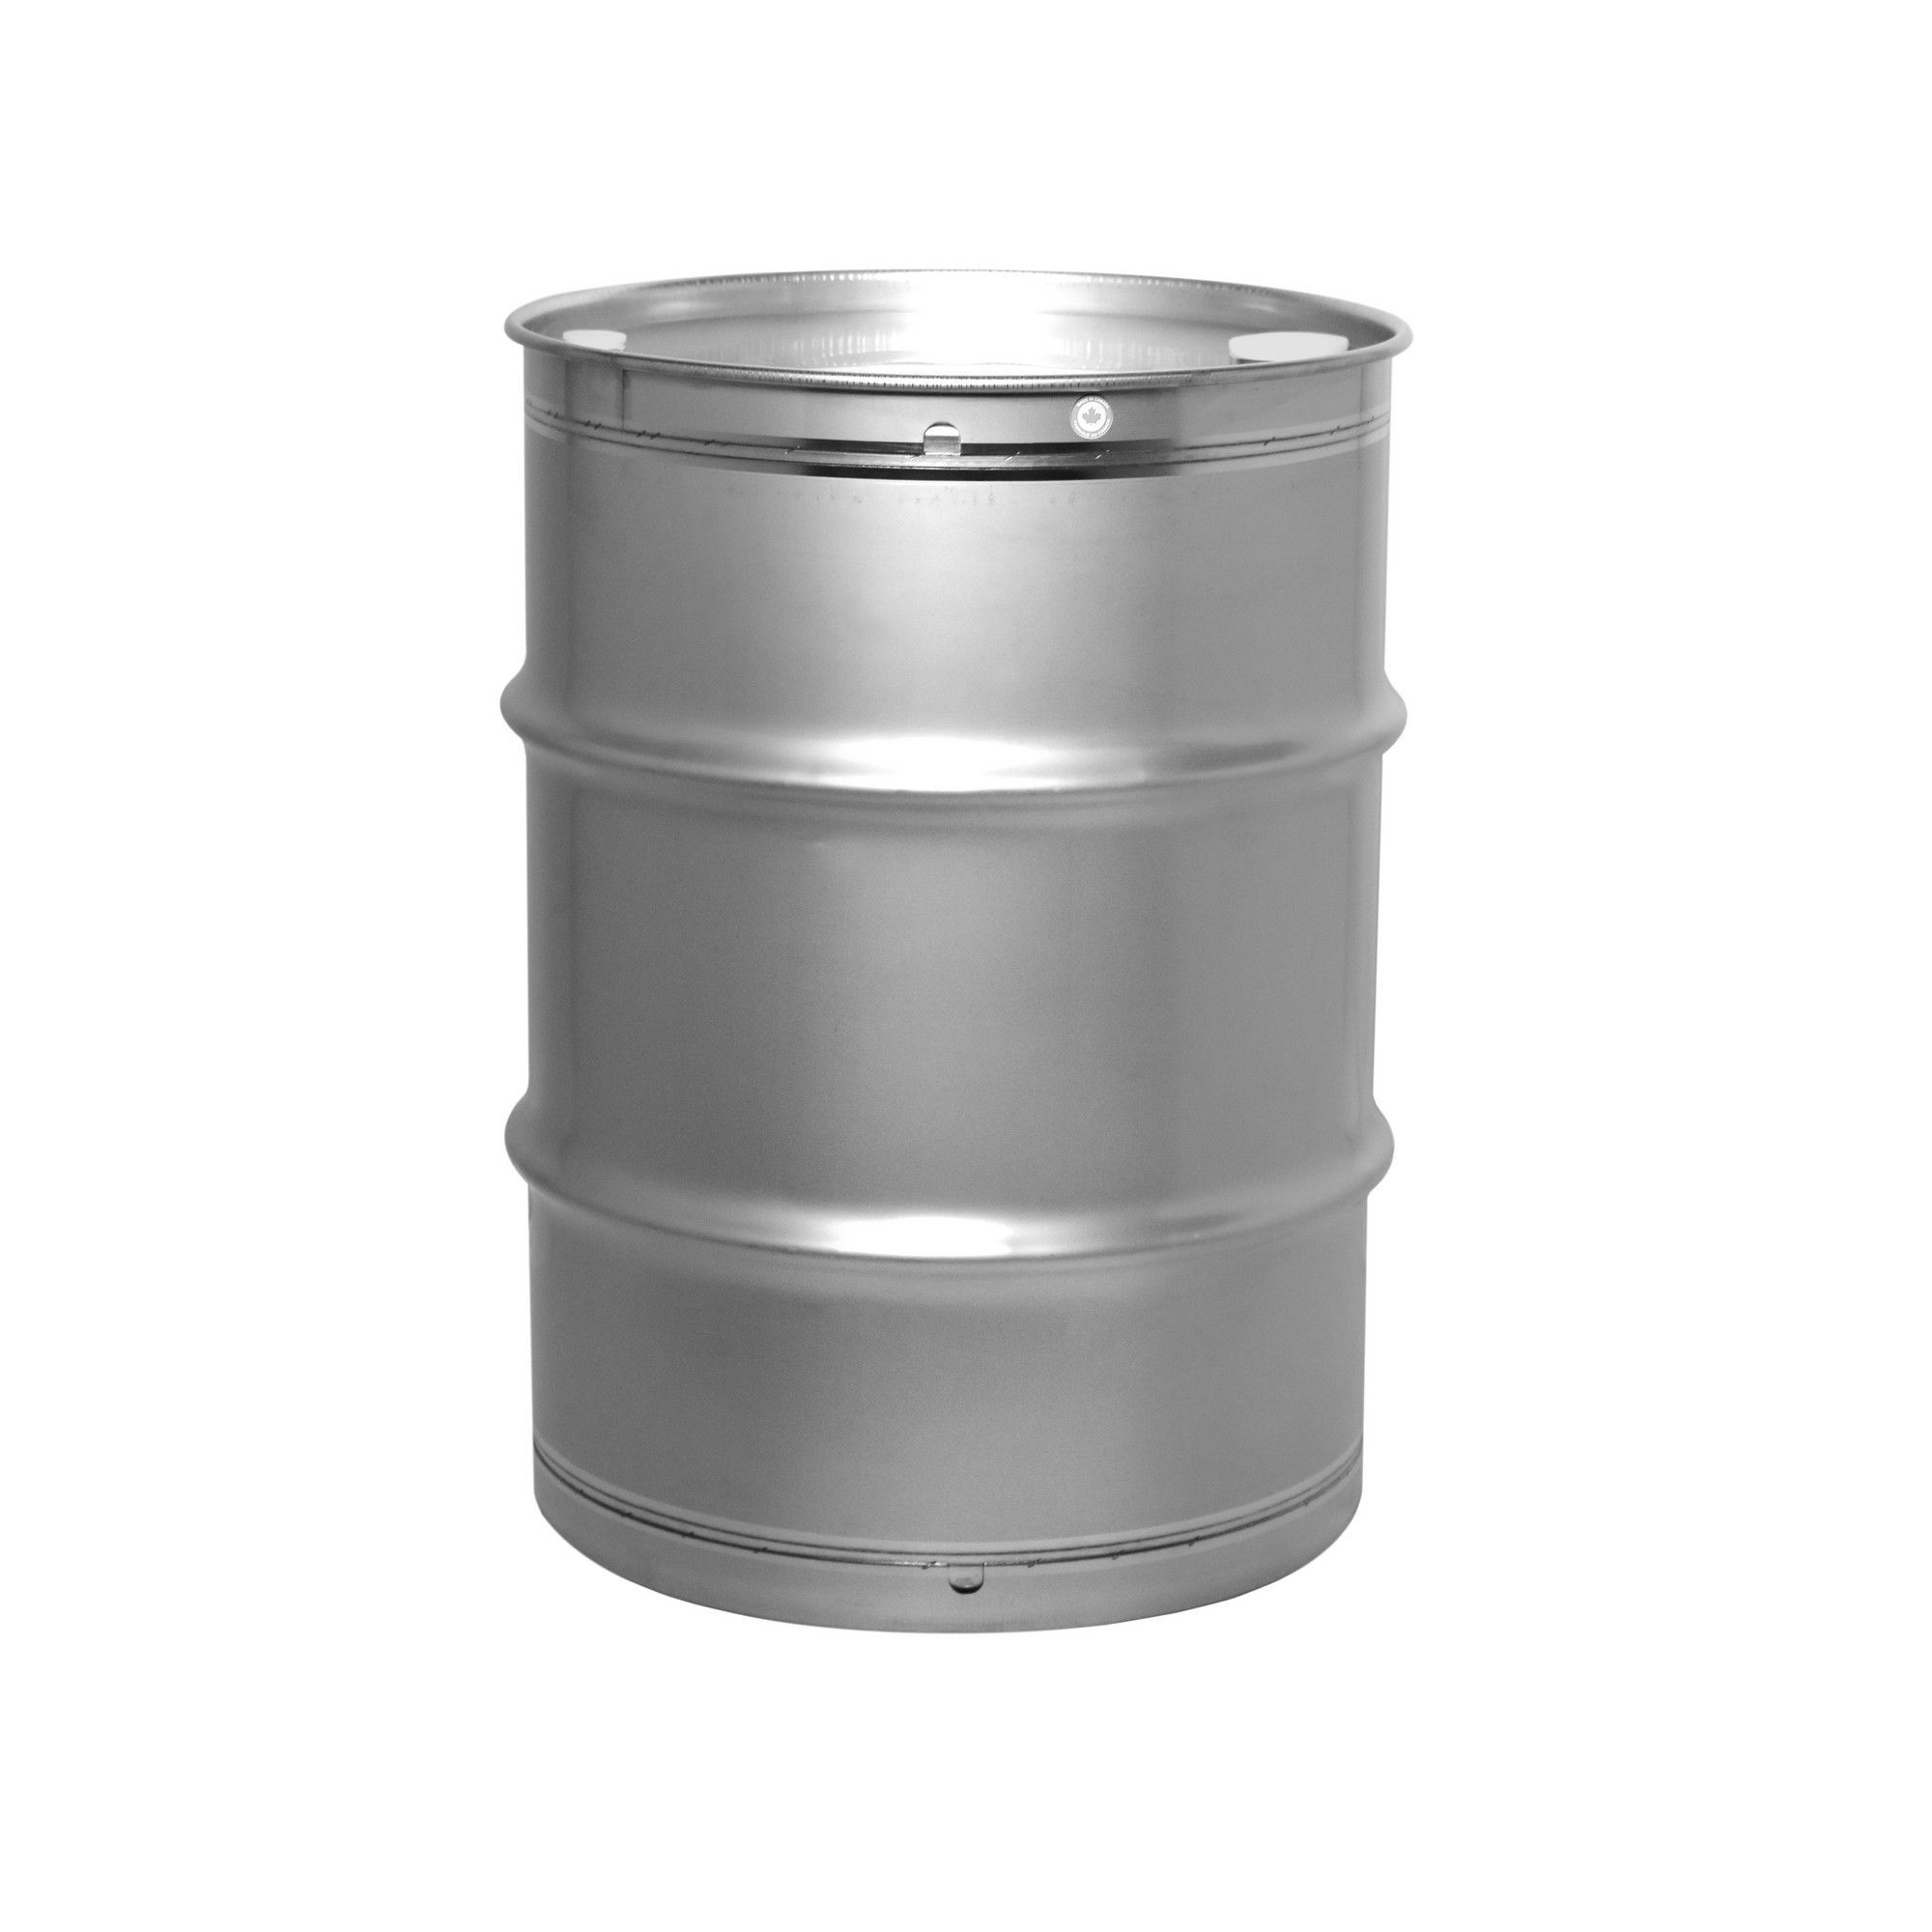 Stainless Steel Drums for Maple Syrup